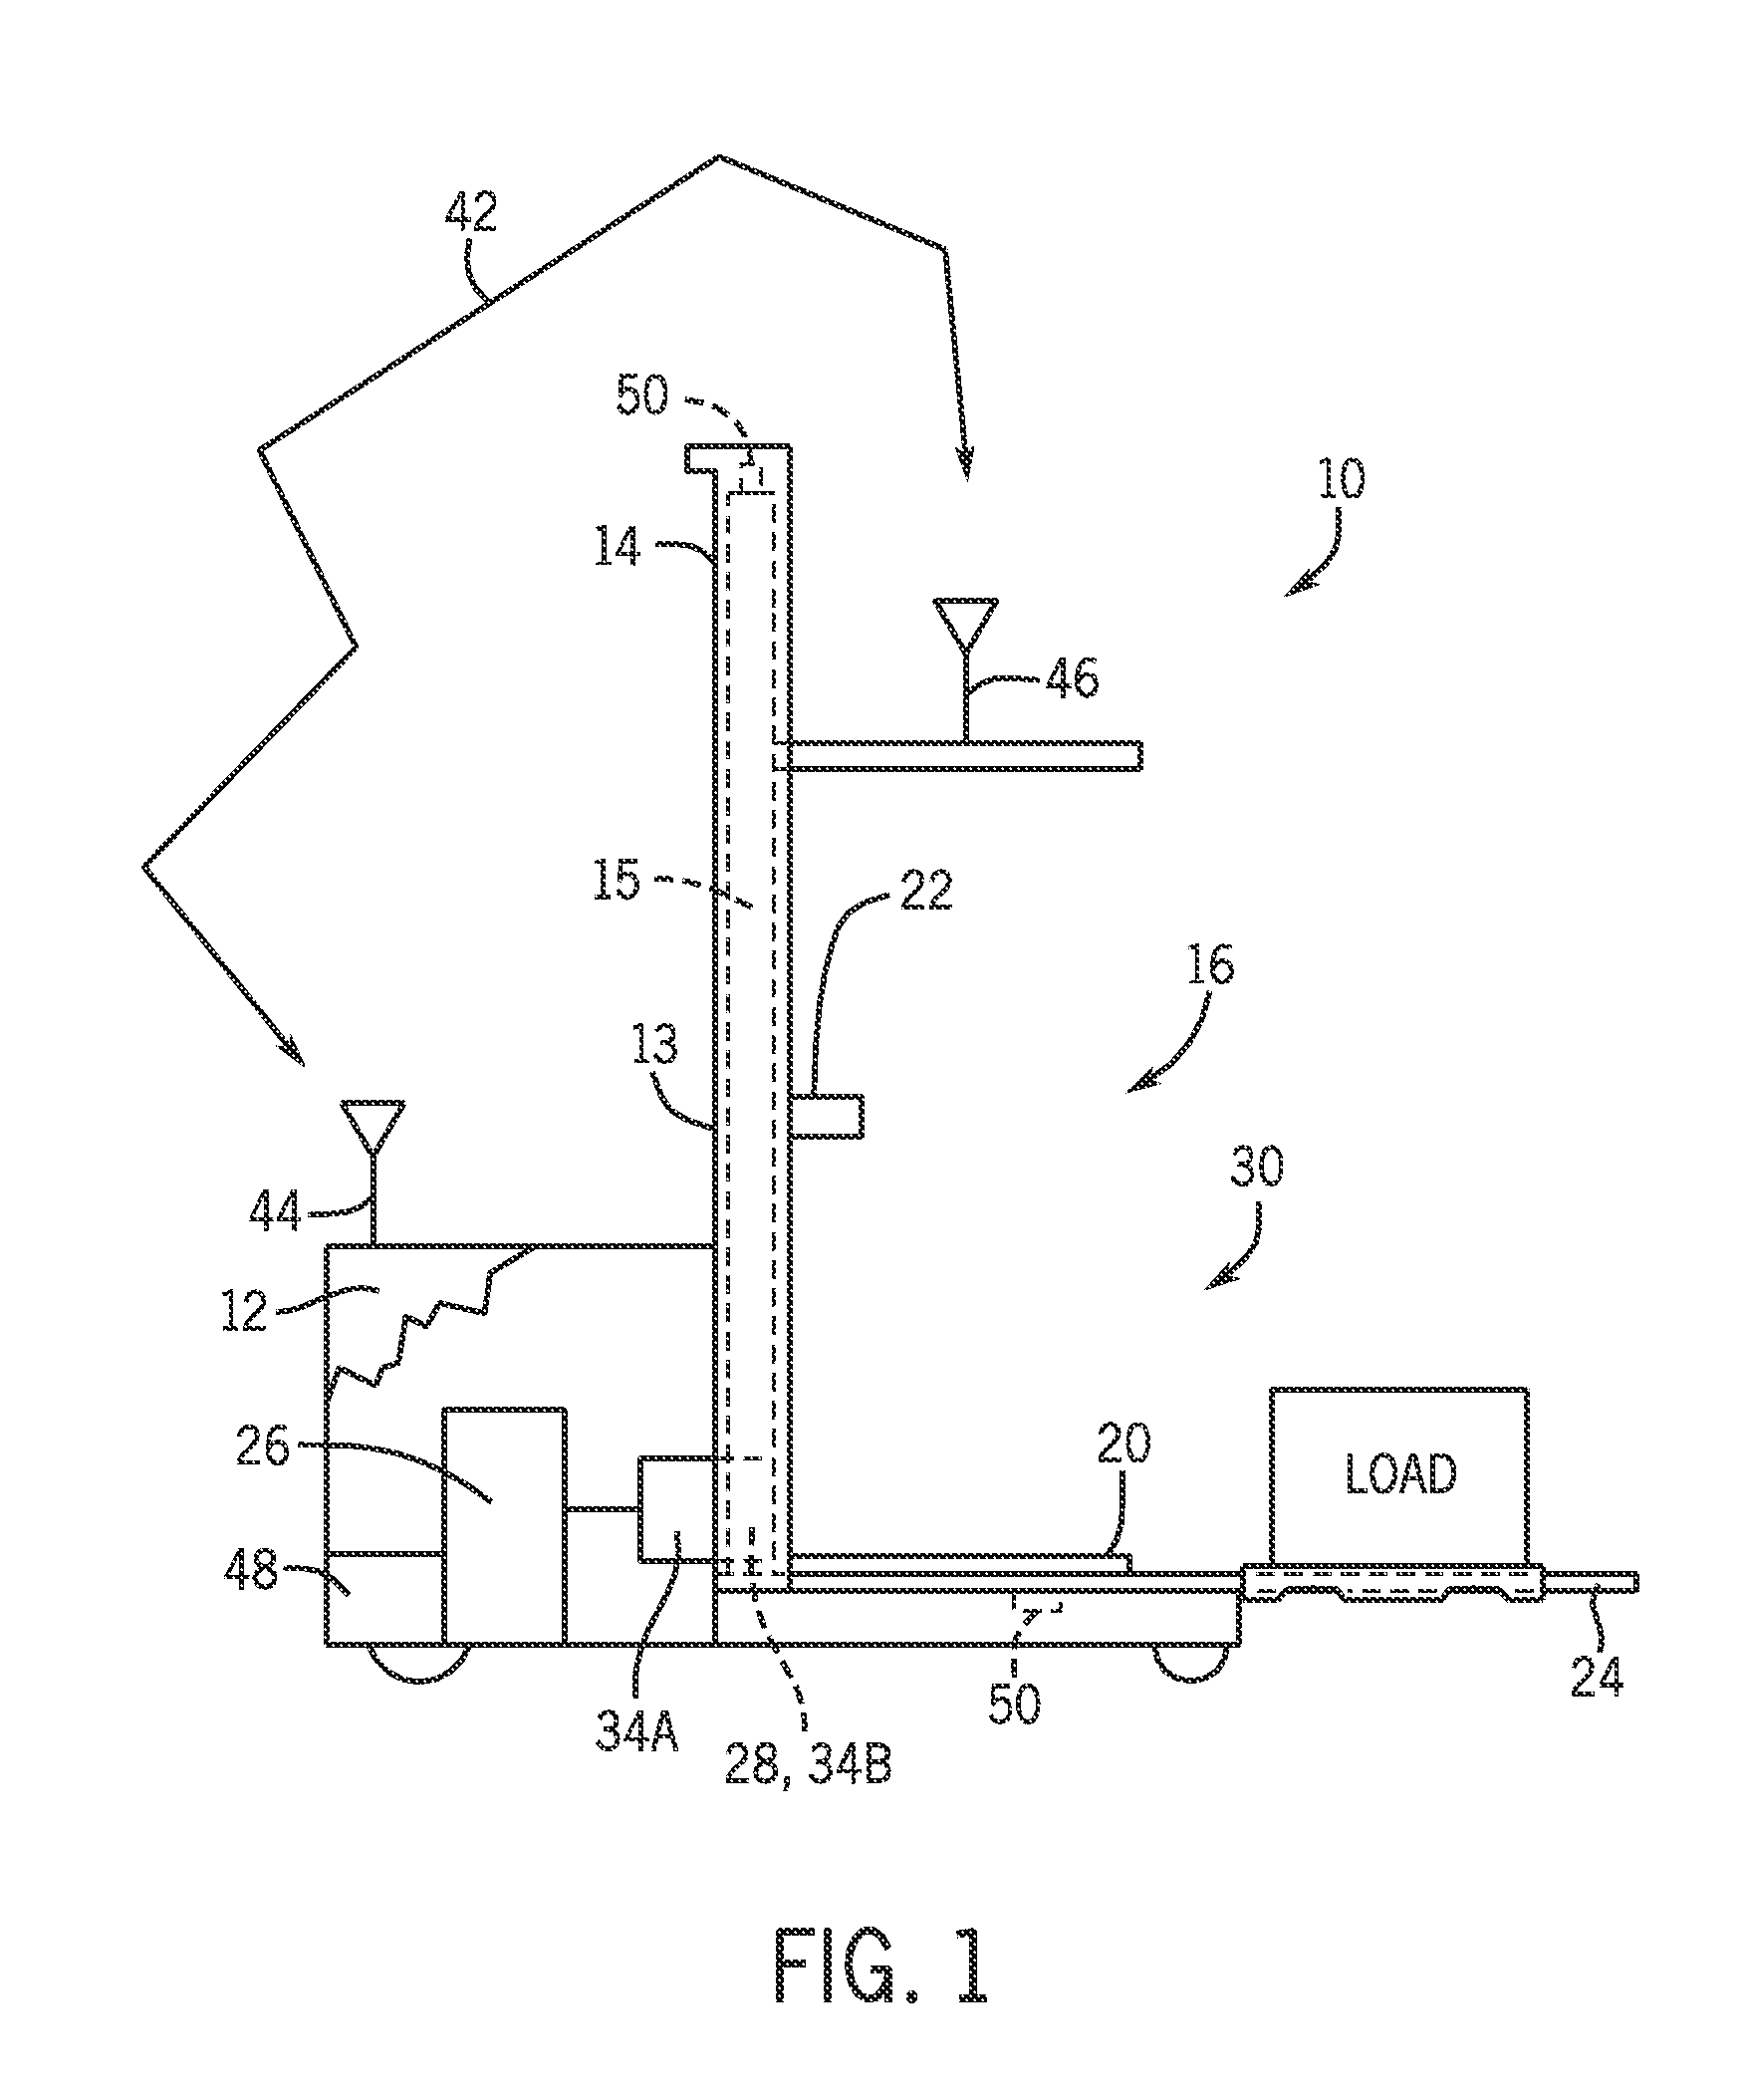 Energy Storage on an Elevated Platform and Transfer Method